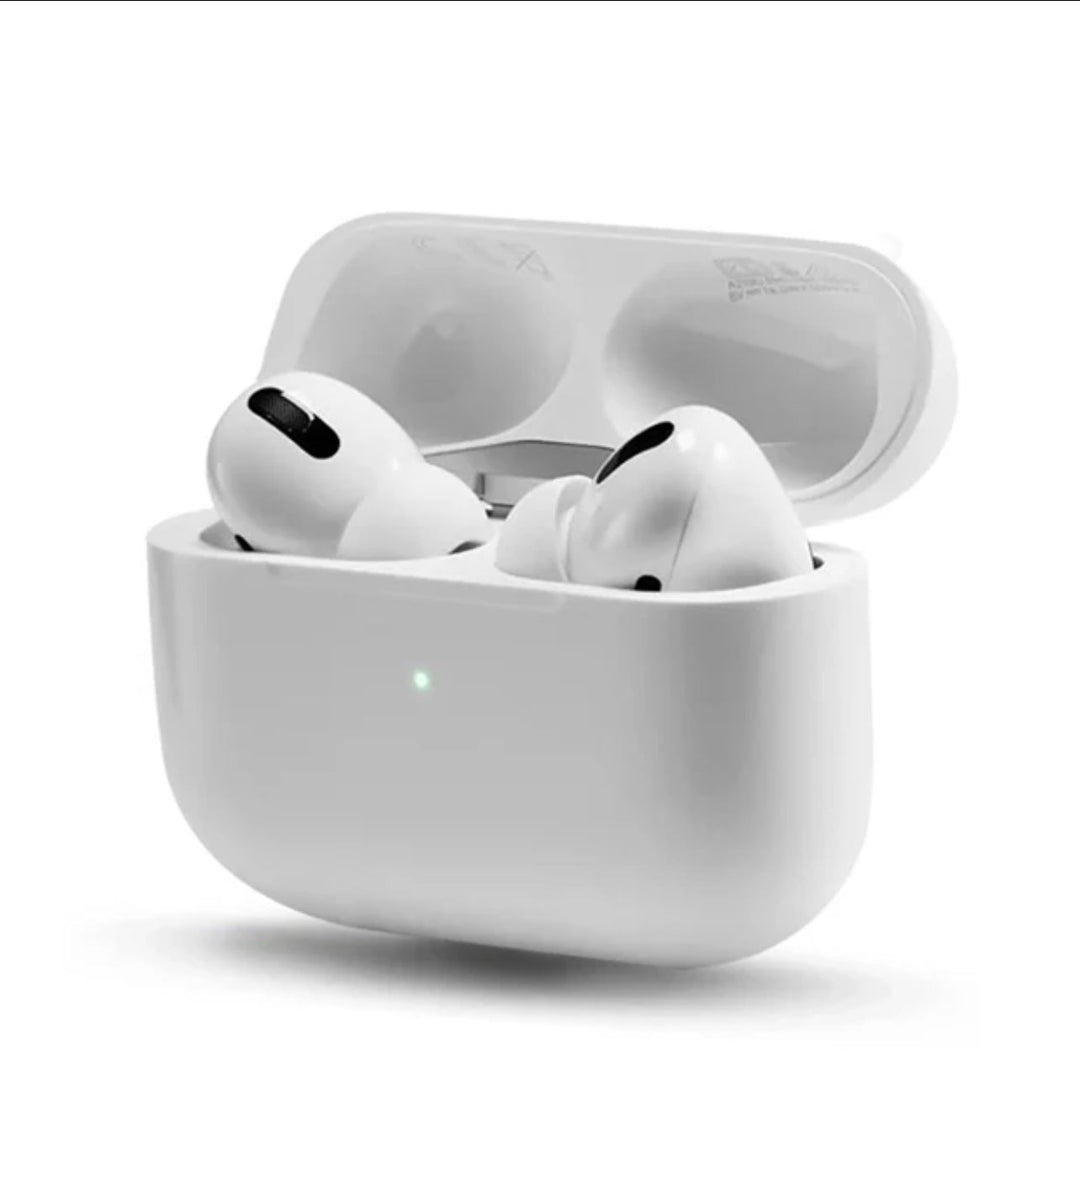 (Watch+Airpods) COMBO DEAL